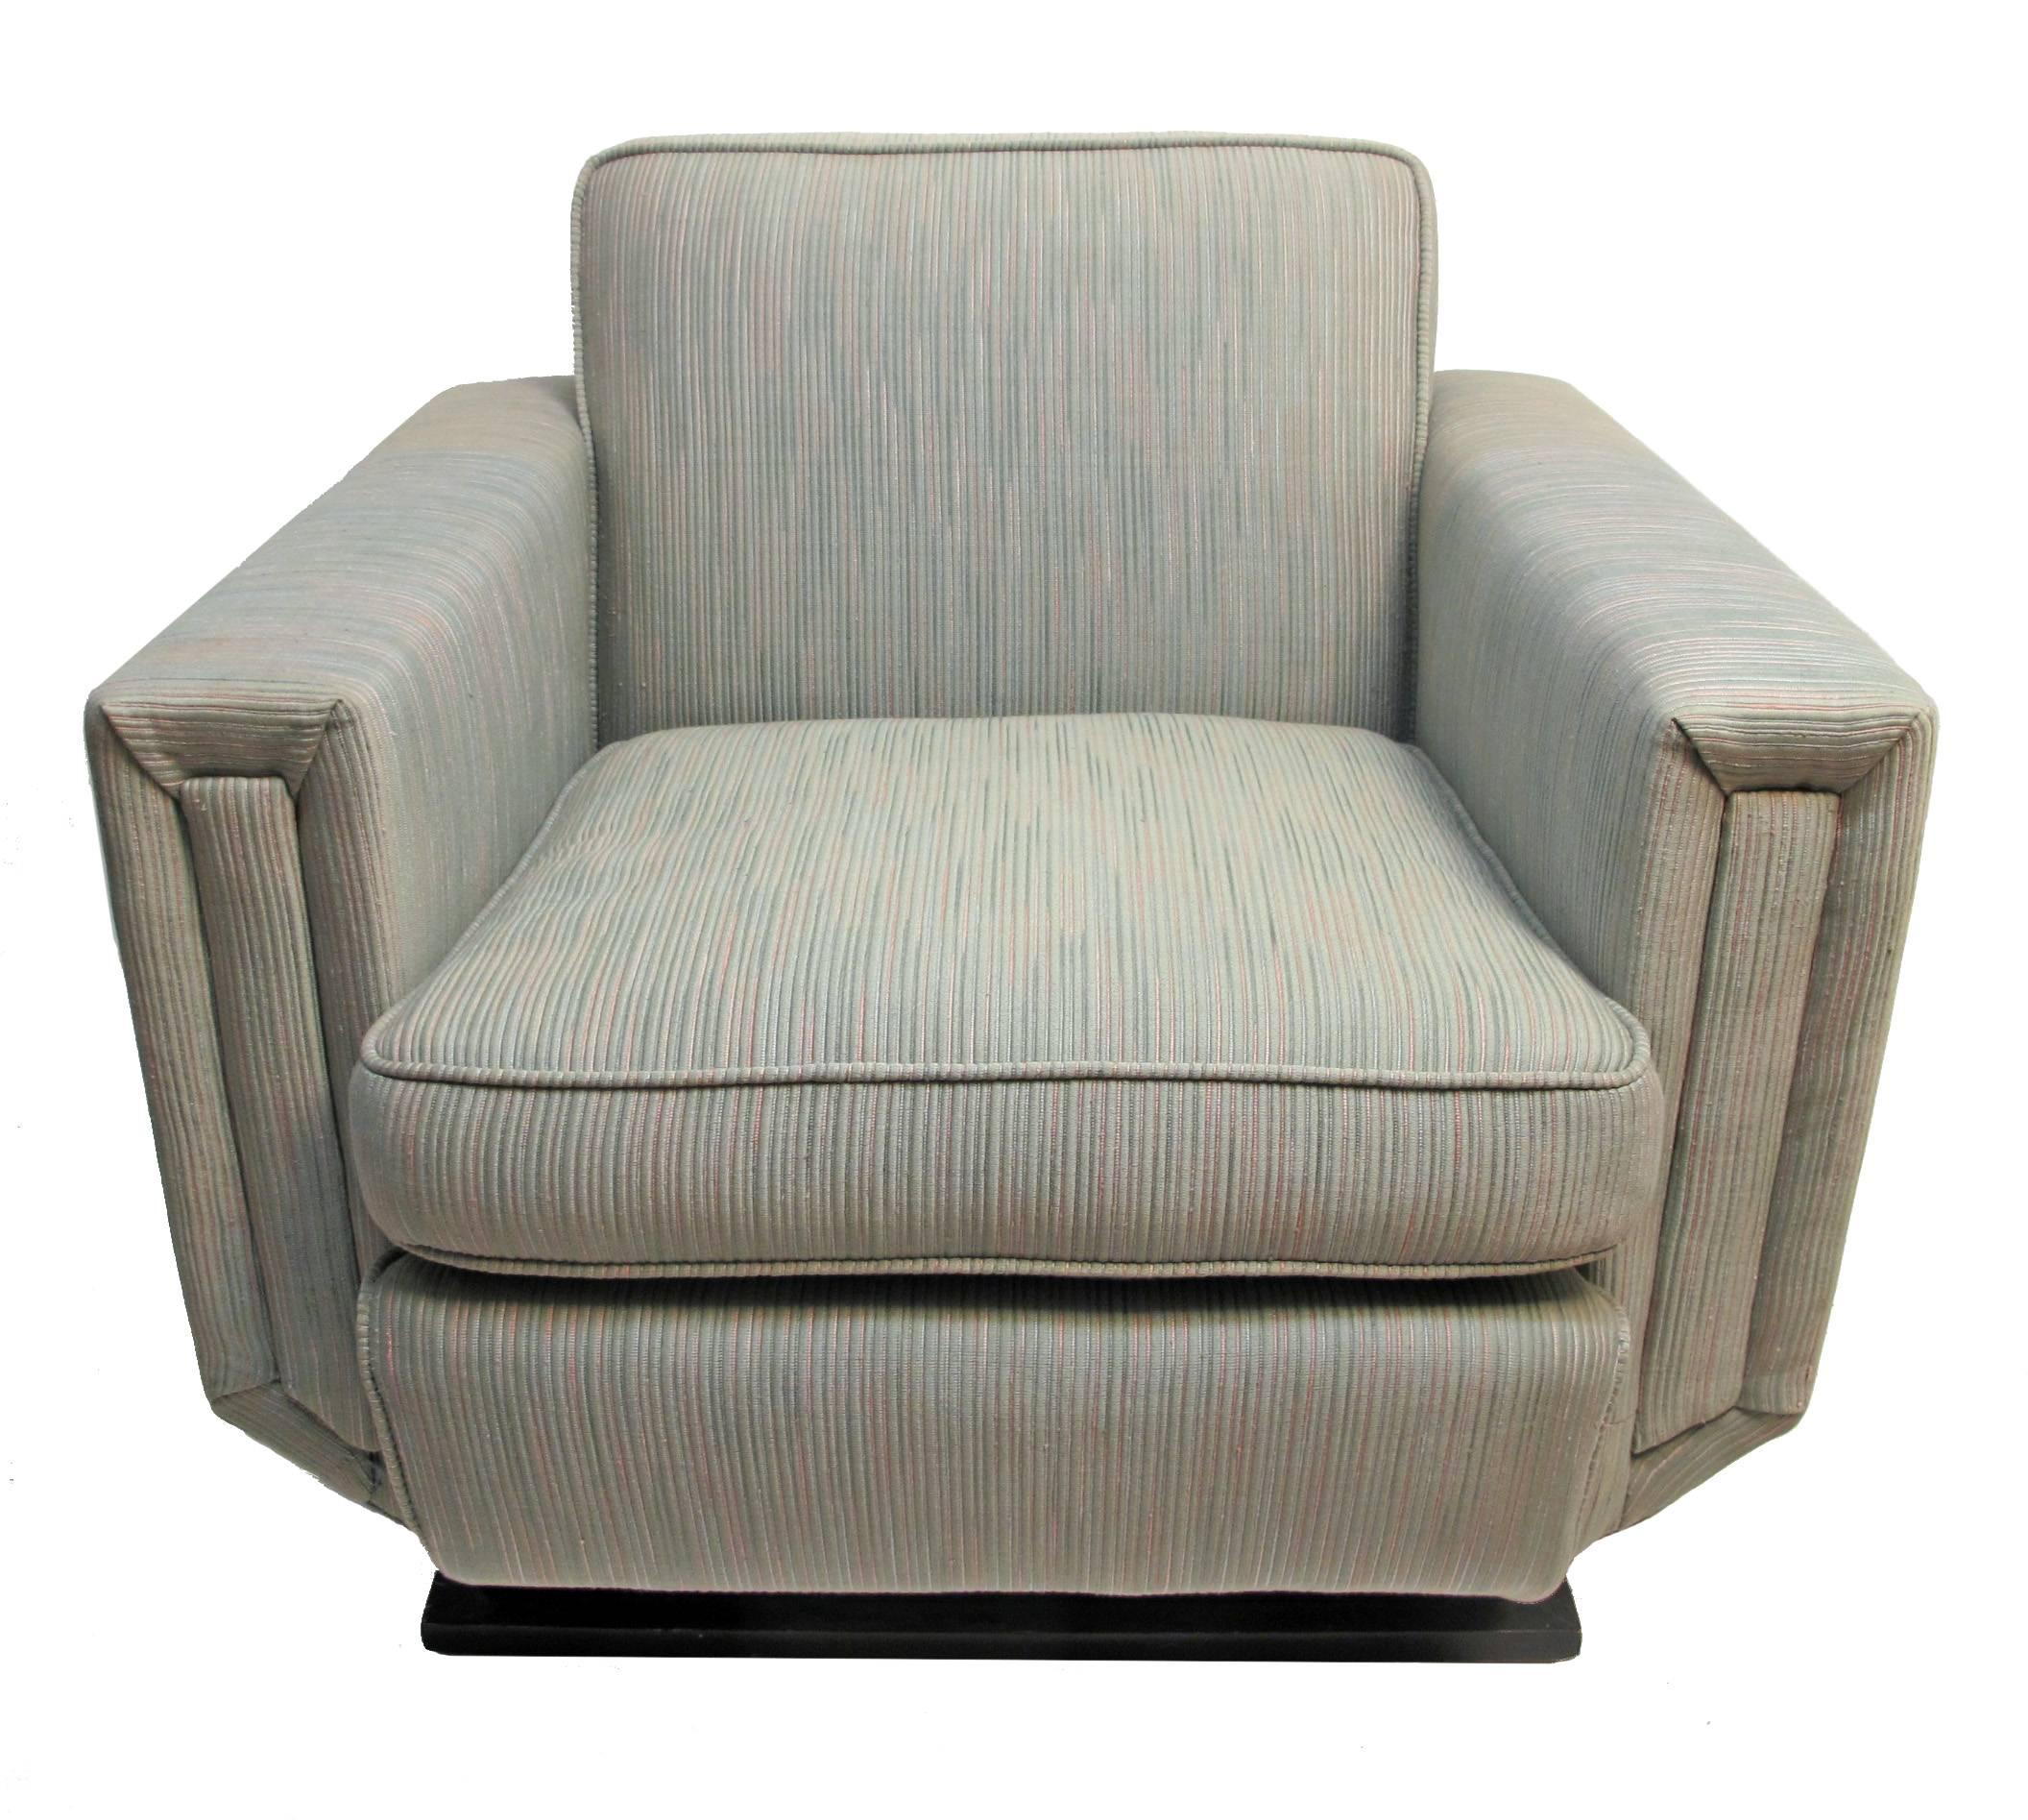 A mid-20th century oversized club chair or armchair, having good form and lines. This is the original upholstery and it is in fair condition.